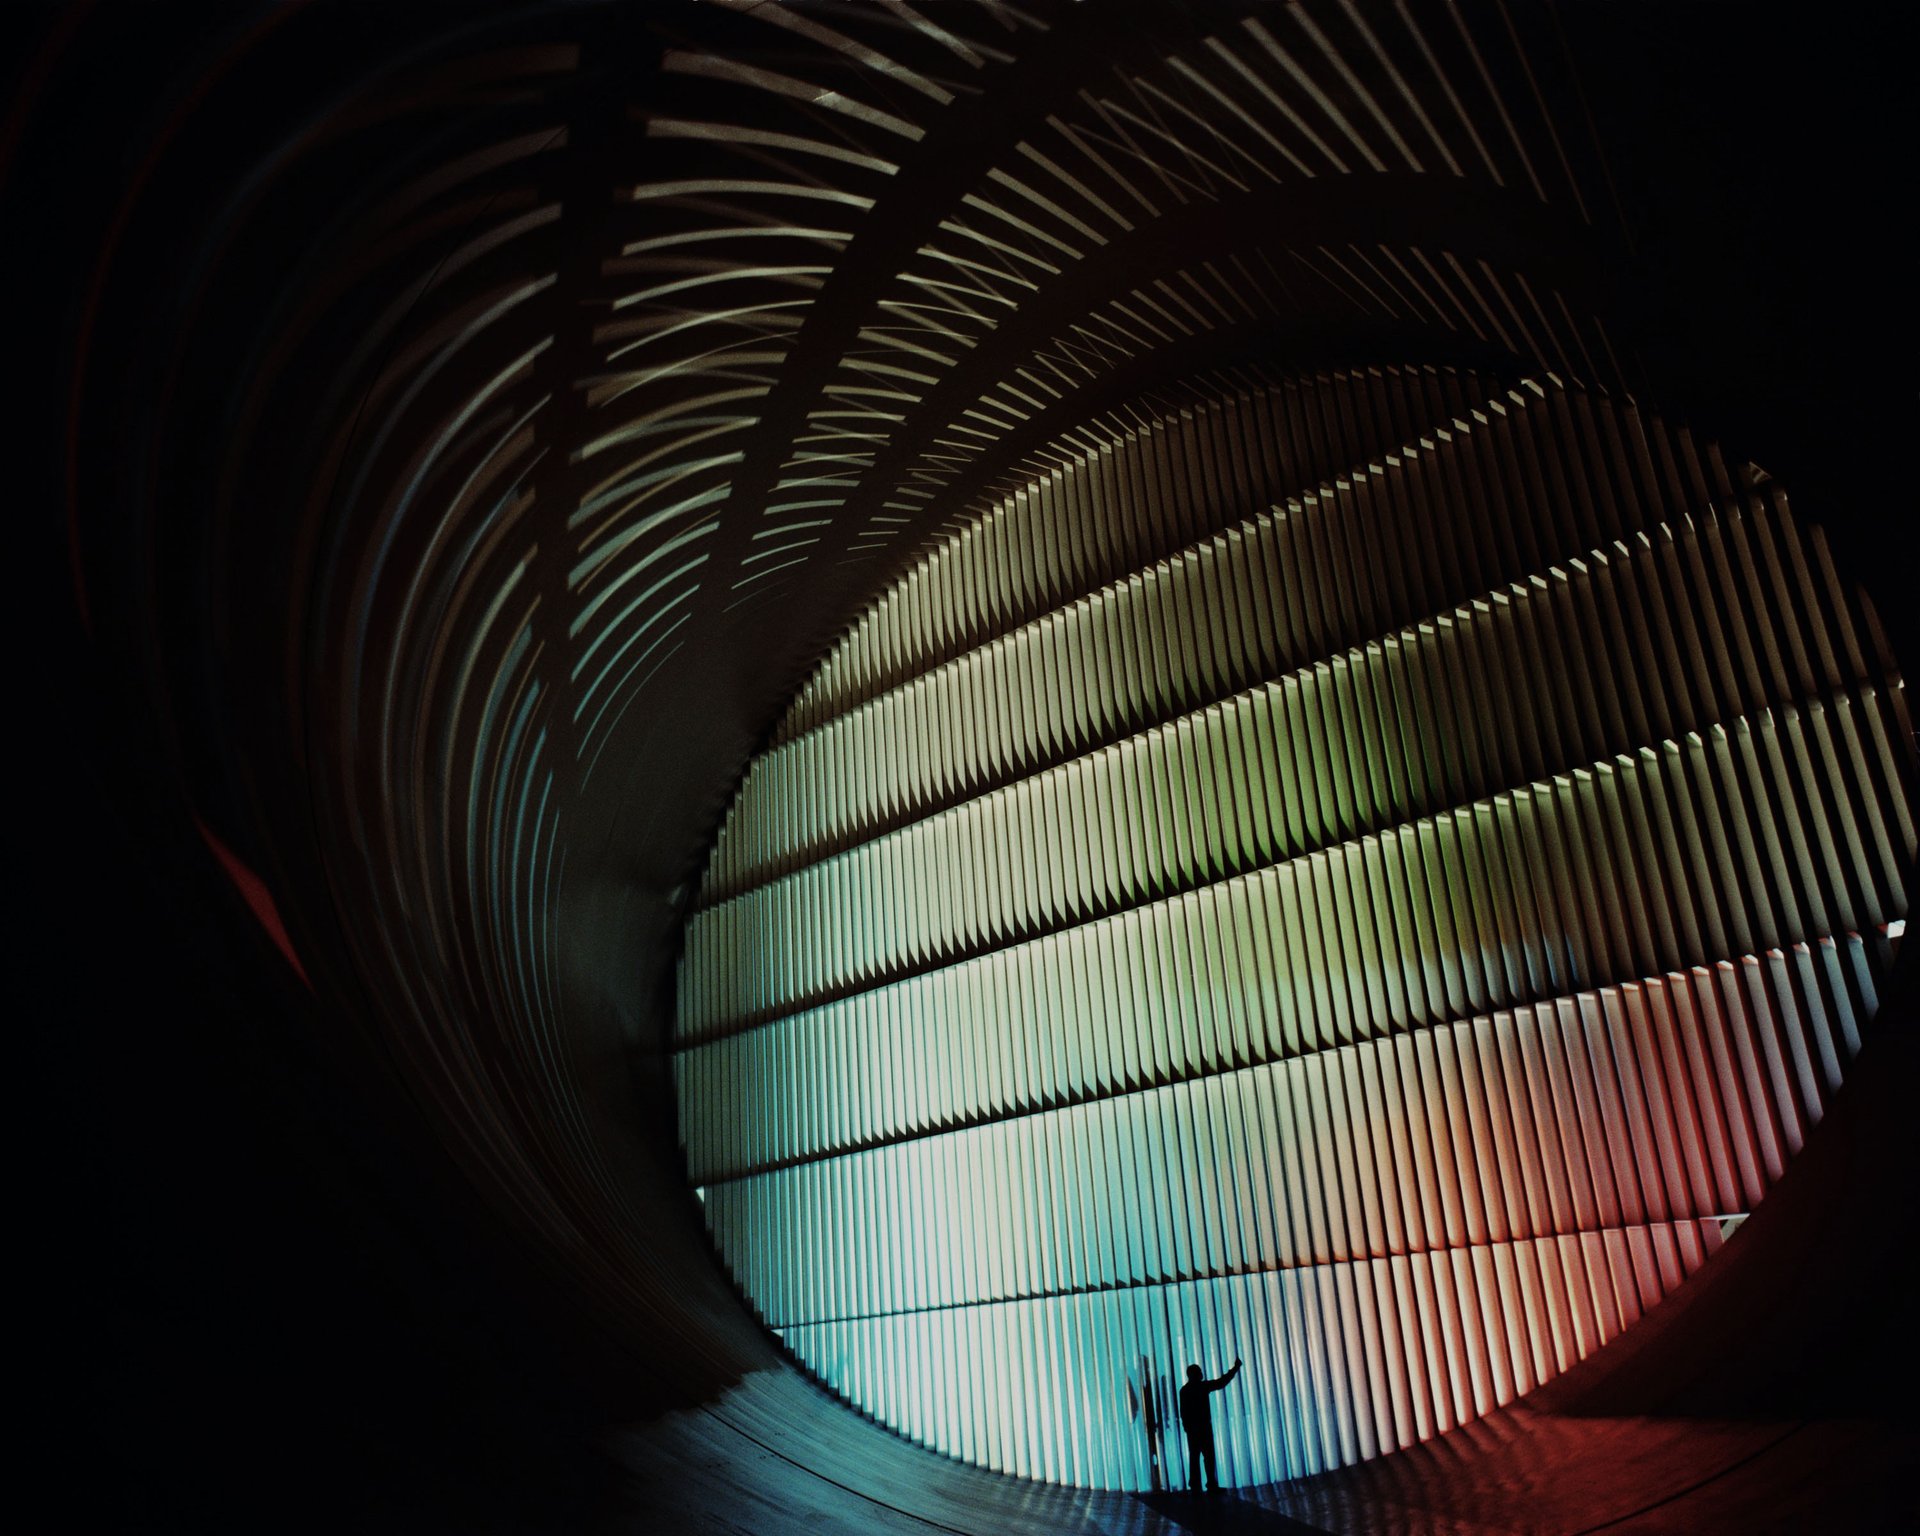 A person stands in a large, ribbed tunnel bathed in soft, gradient lighting from green to blue to red, creating a serene atmosphere.